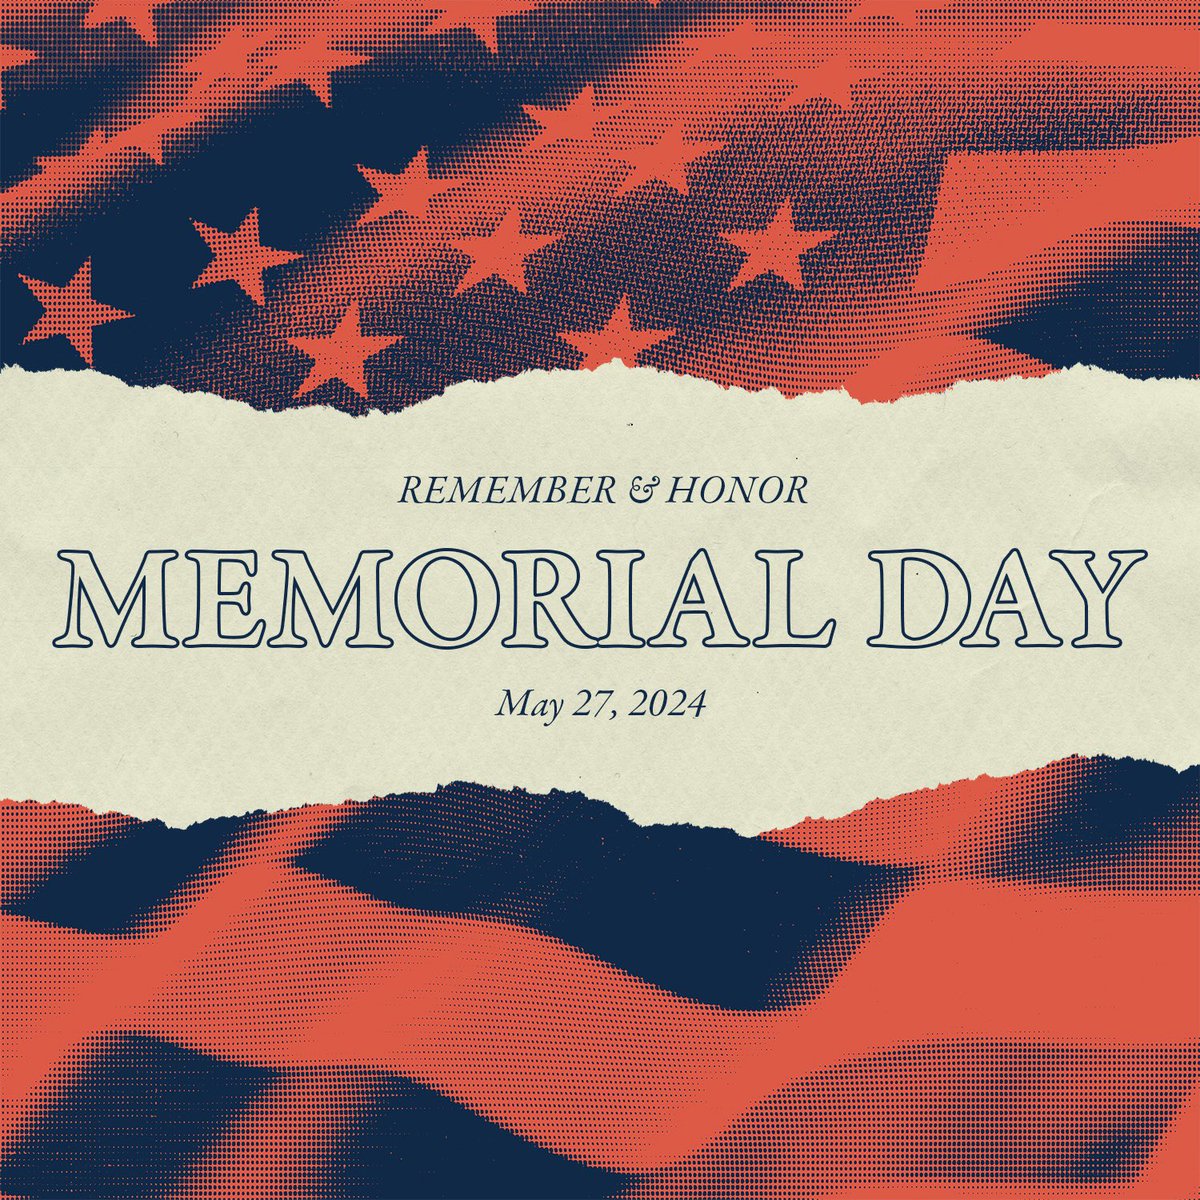 On Memorial Day, we must always remember the brave men and women who sacrificed their lives in defense of our country.